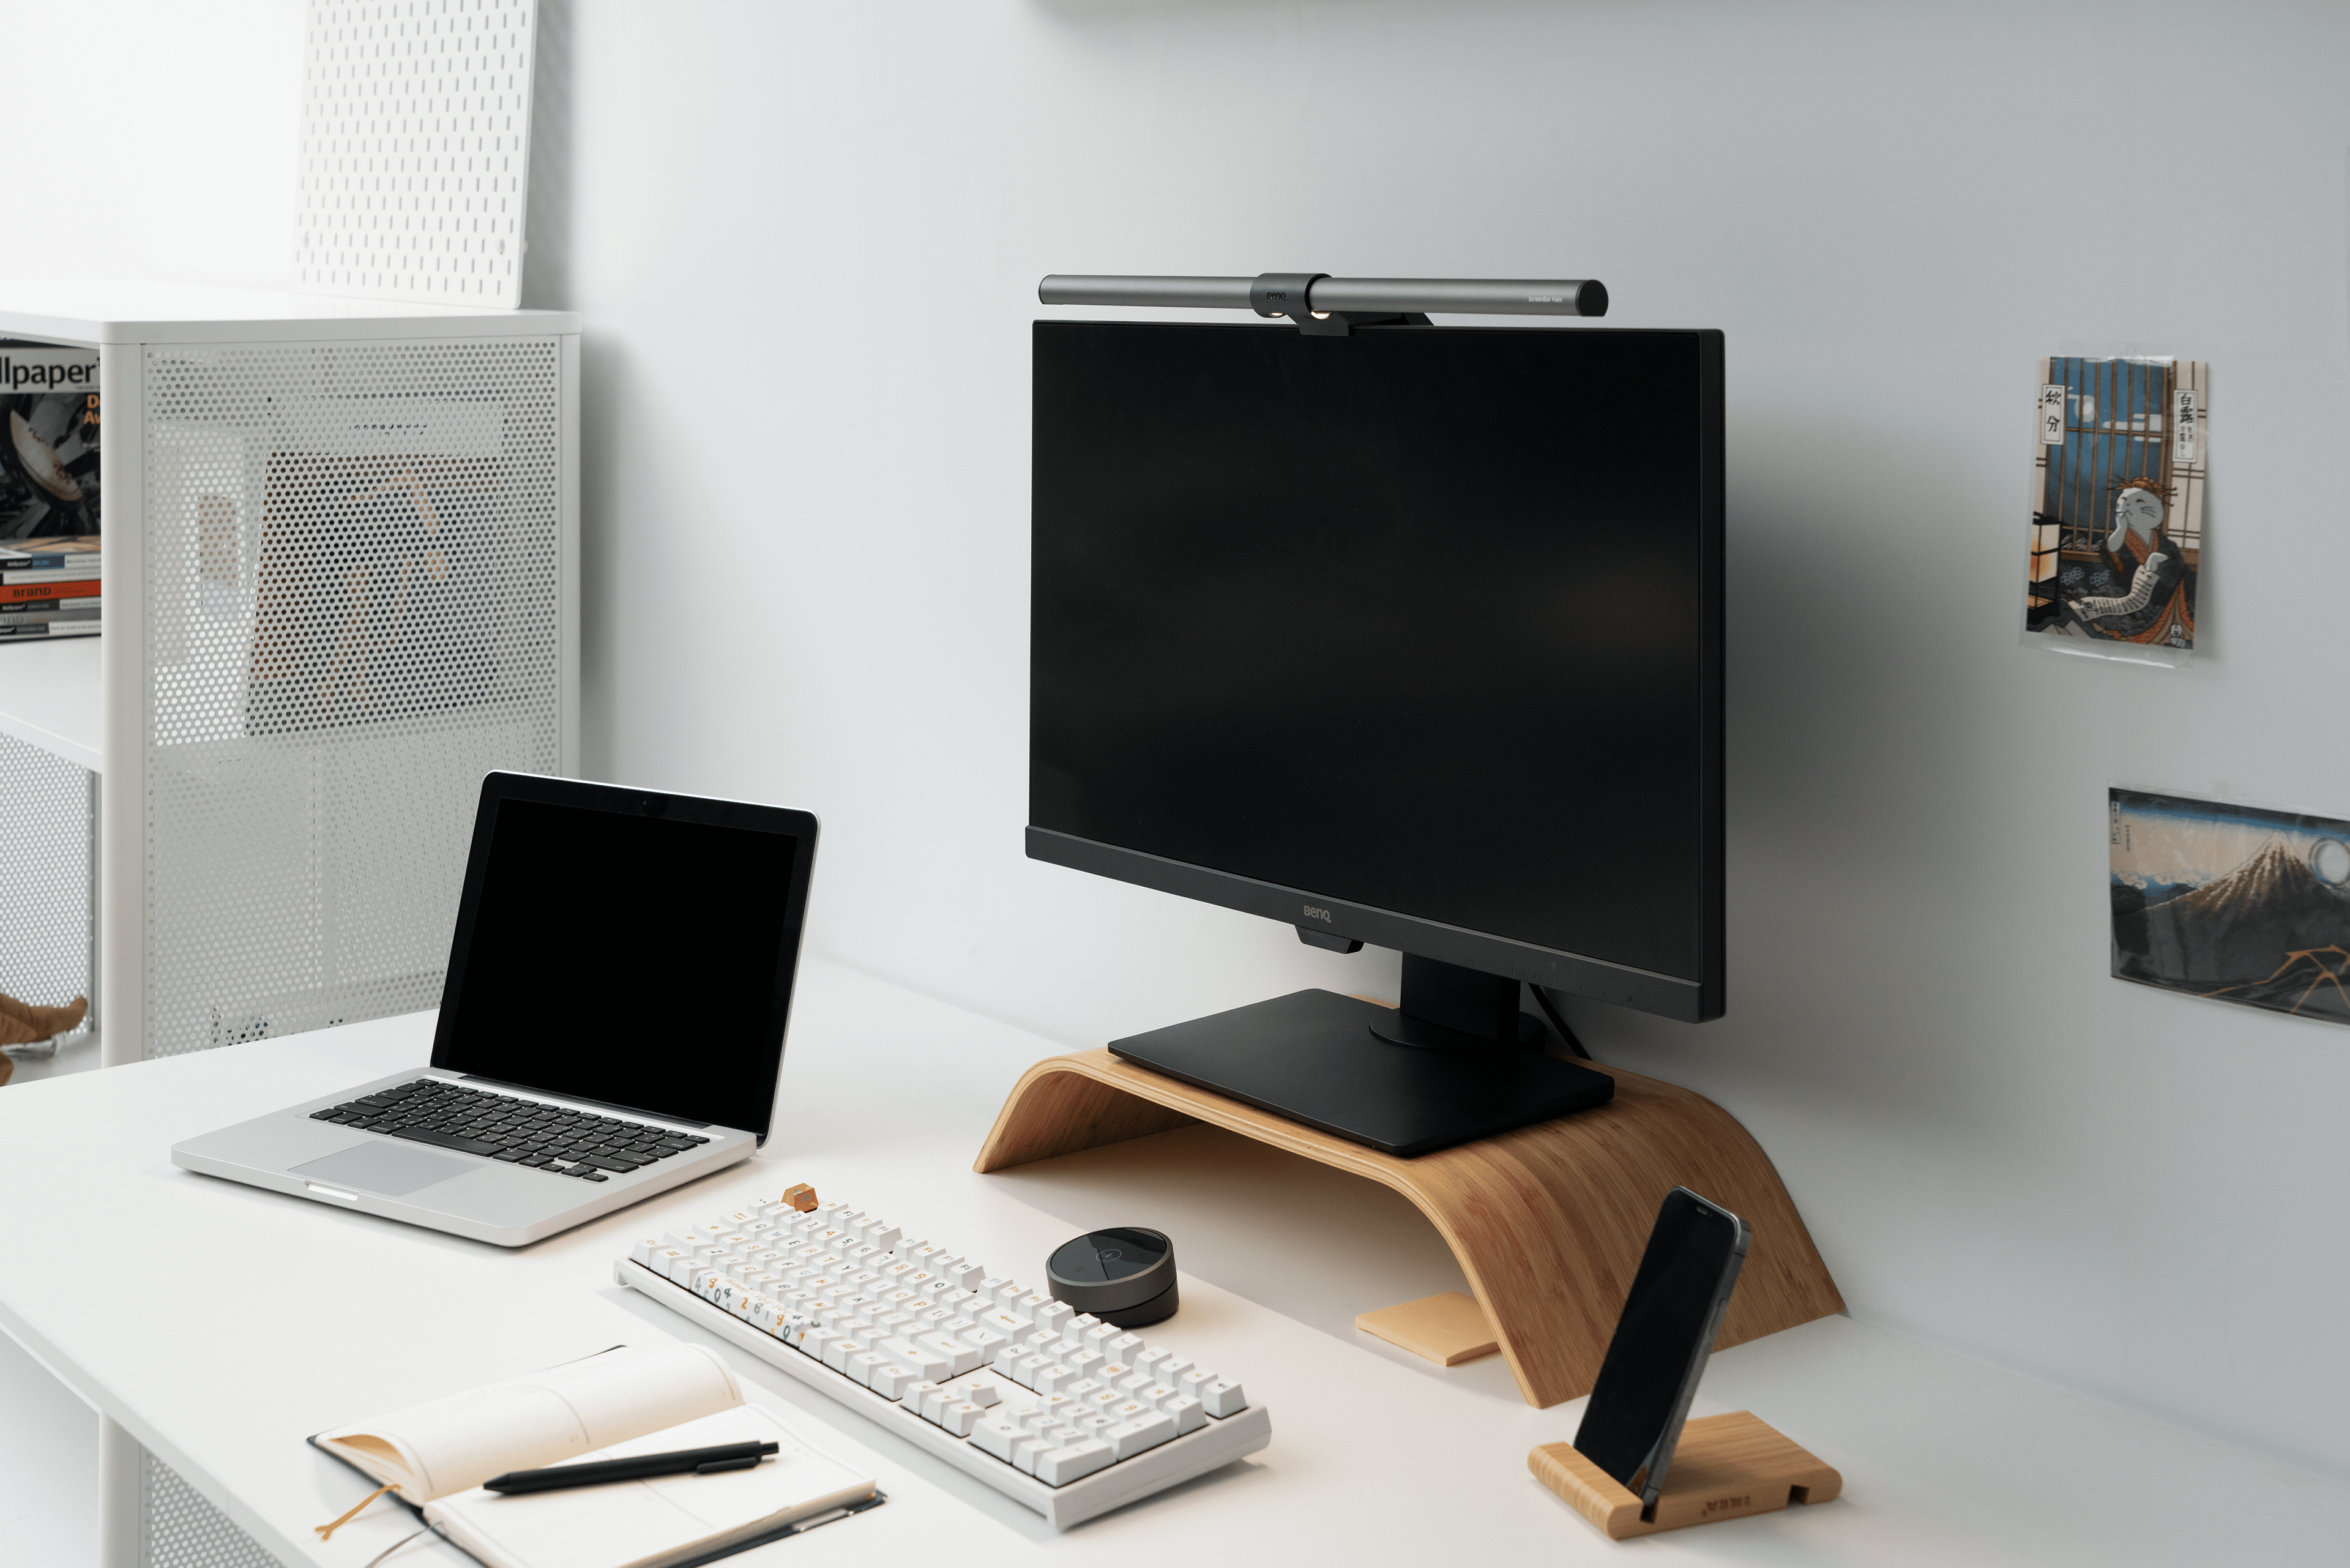 ScreenBars have a built-in sensor, so that with just a simple tap they auto adjust brightness throughout the day to deliver 500 lumens to your desk.